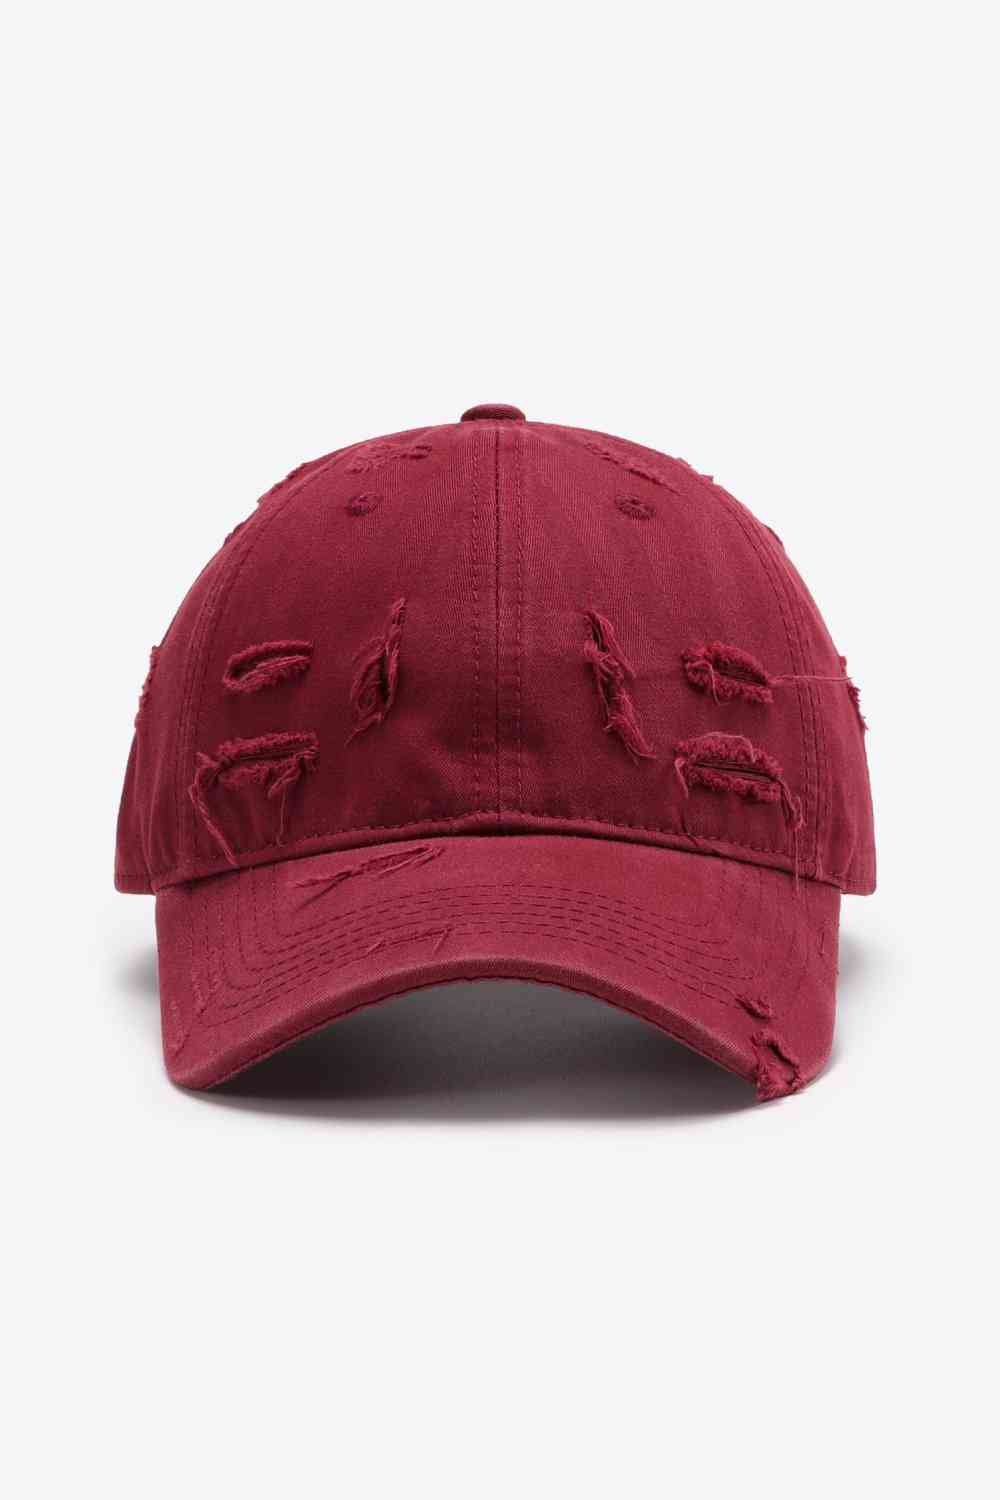 Ashen Twilight Distressed Adjustable 100% Cotton Womens Cap | Hypoallergenic - Allergy Friendly - Naturally Free